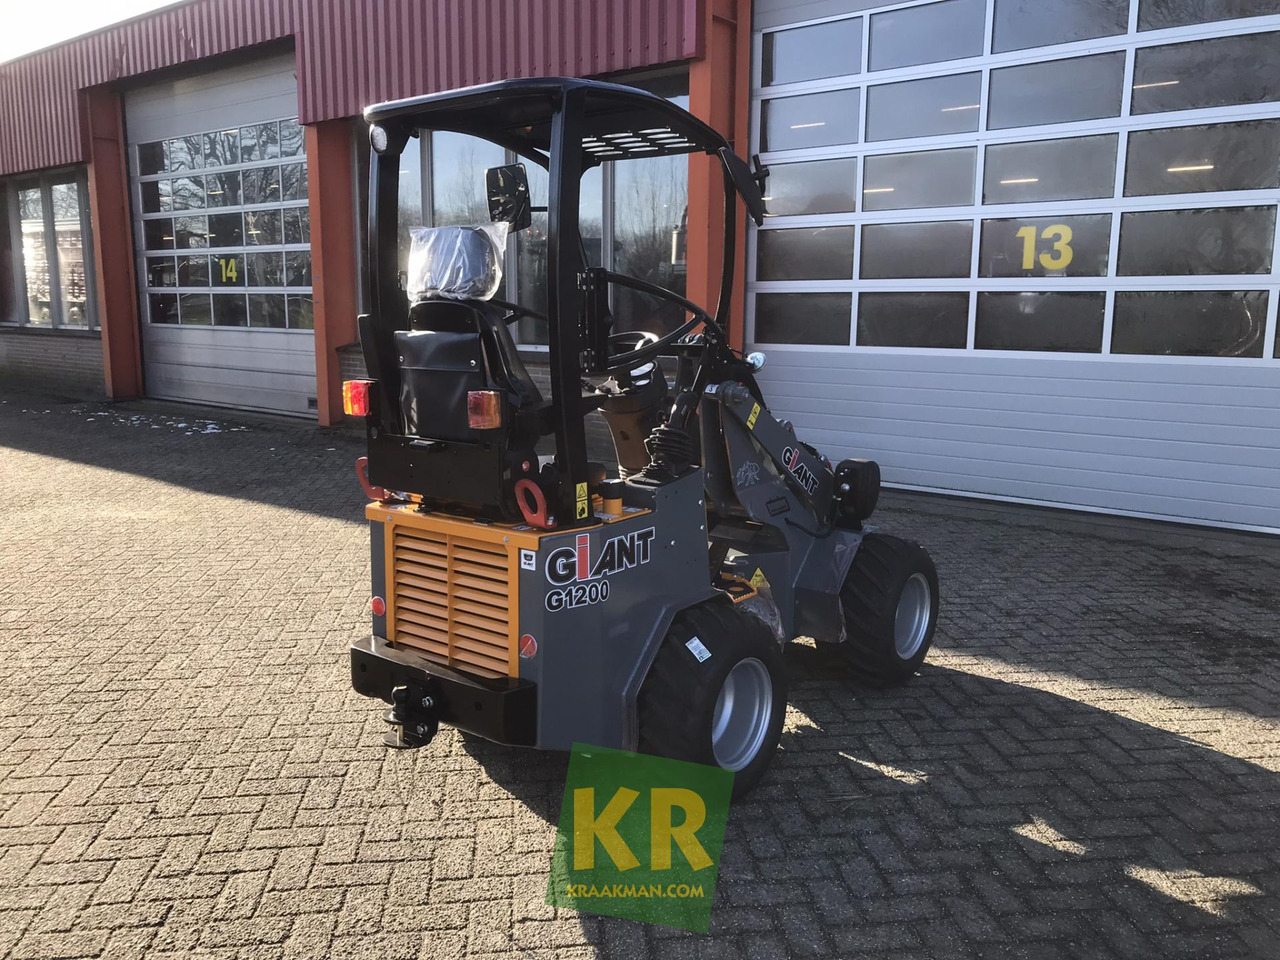 Compact loader G1200 Giant